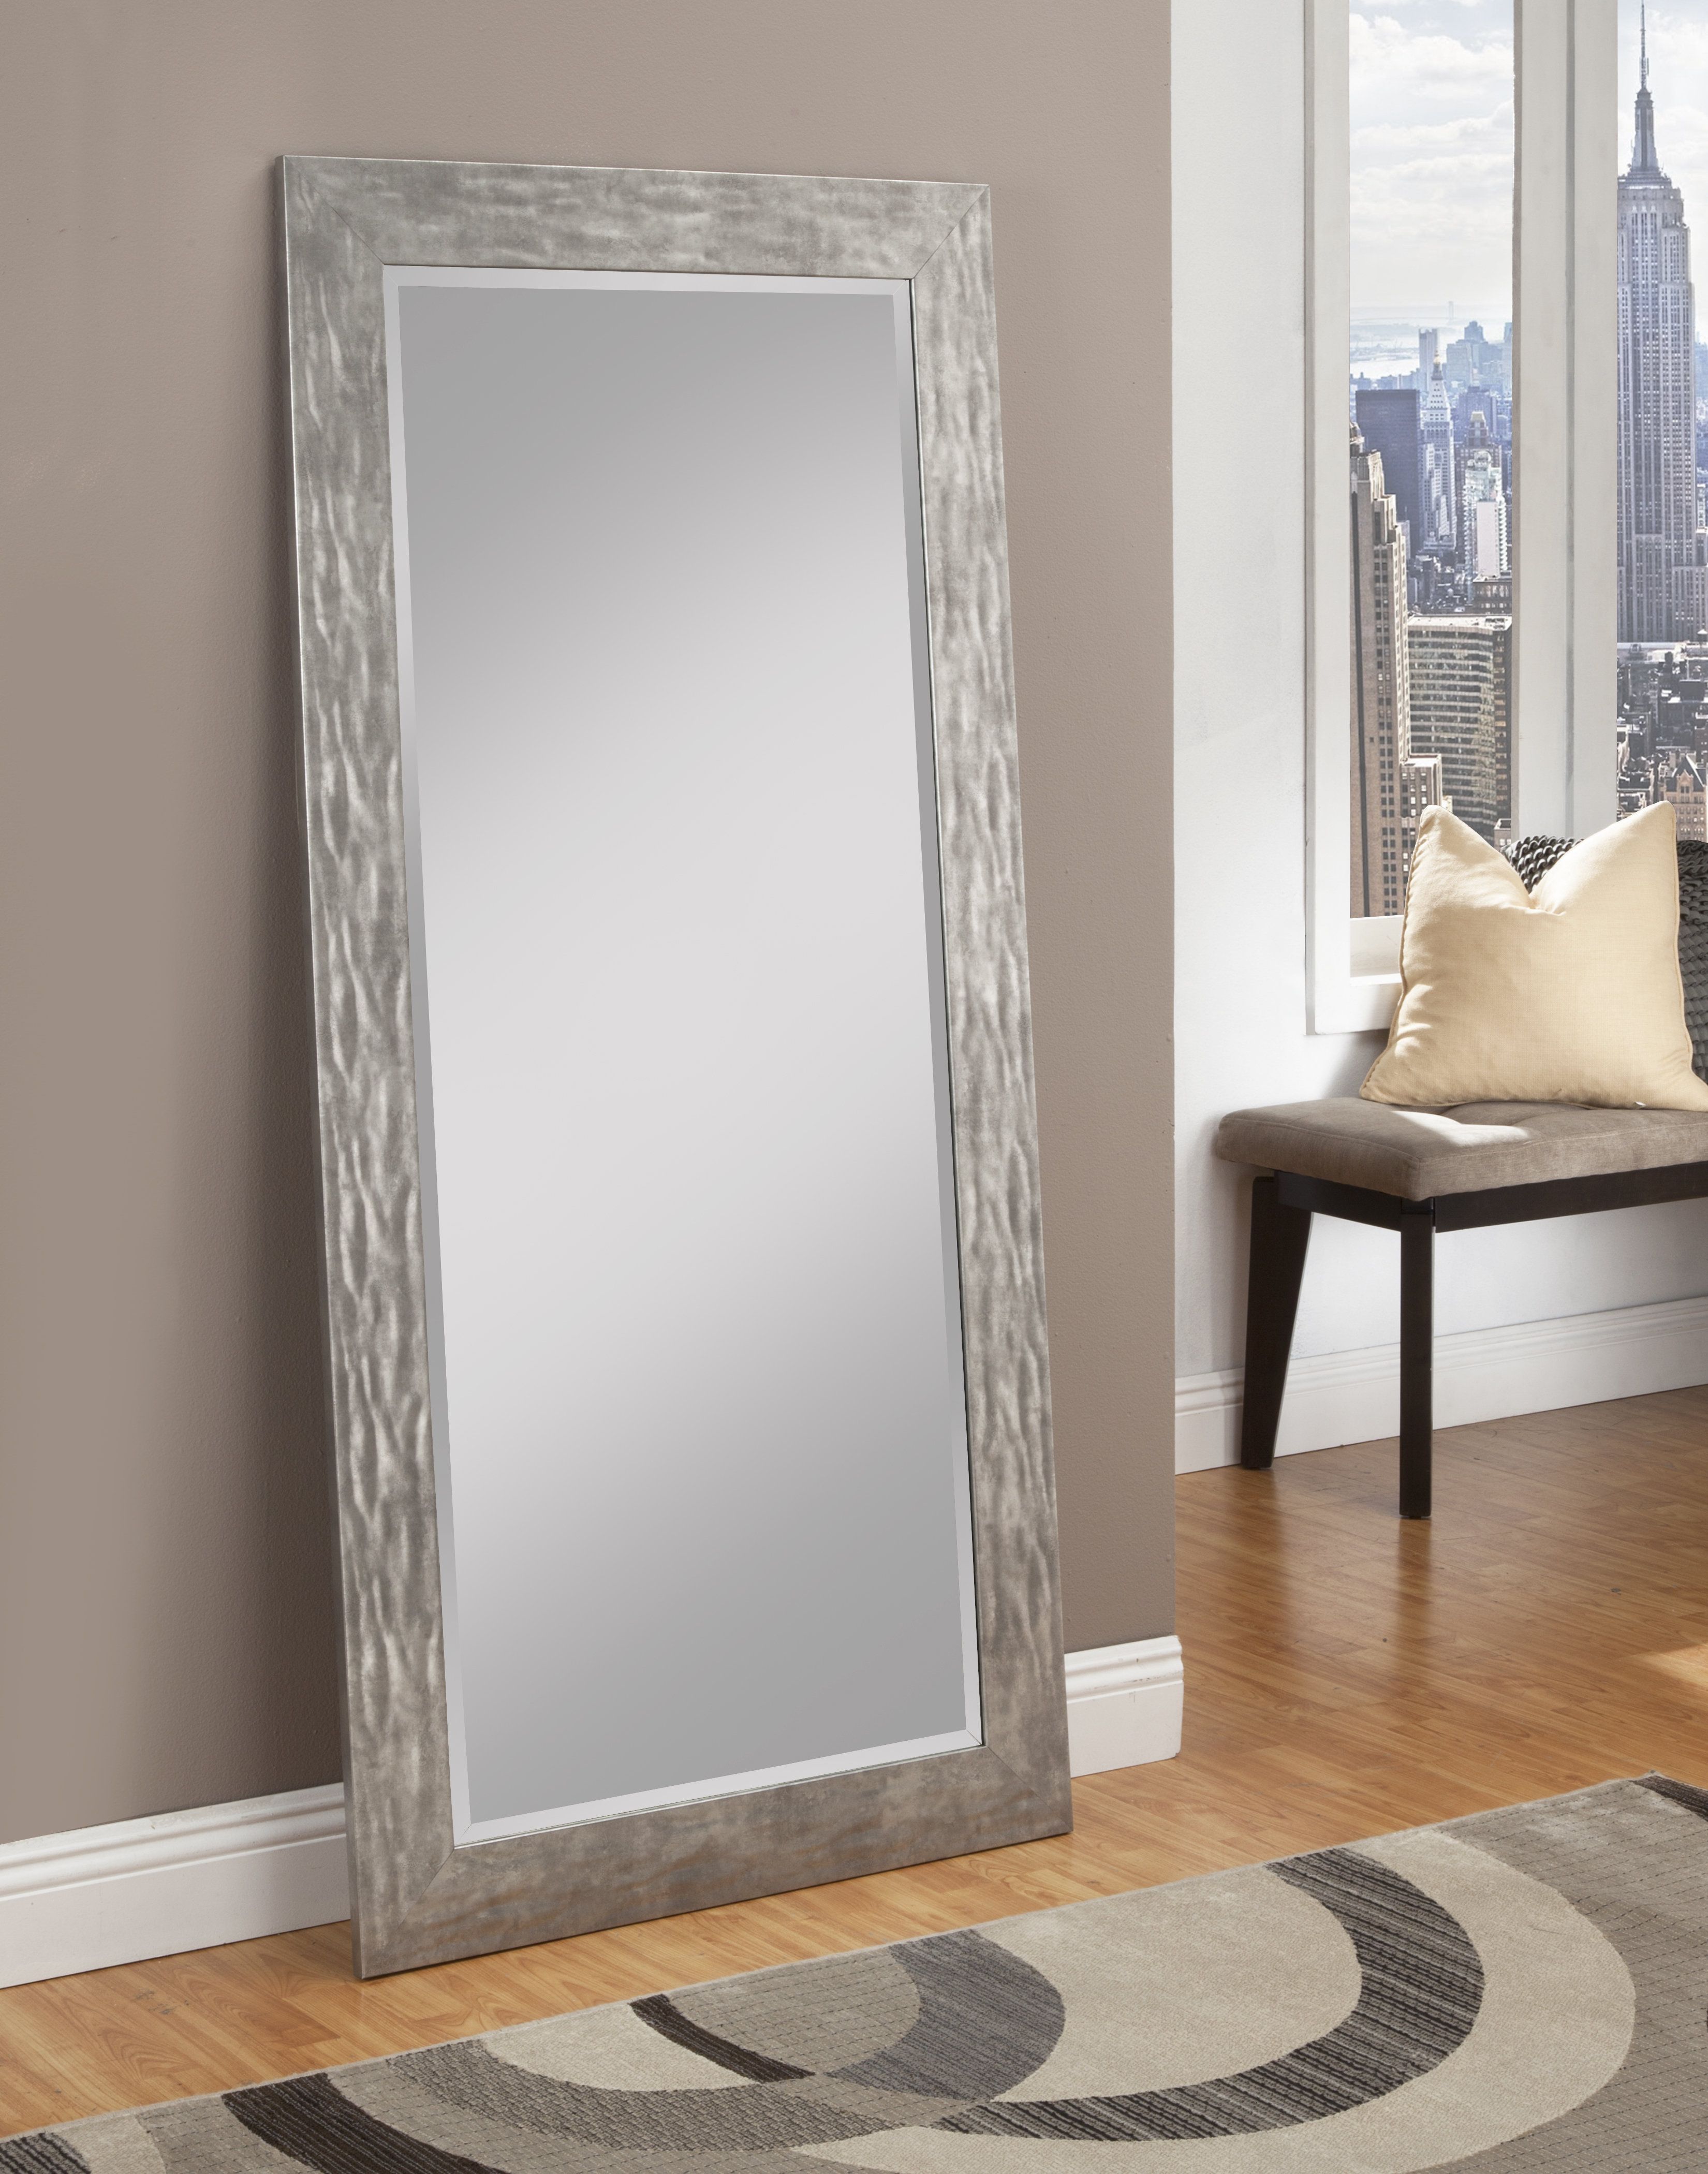 Coastal Wall & Accent Mirrors | Birch Lane With Regard To Marion Wall Mirrors (View 14 of 30)